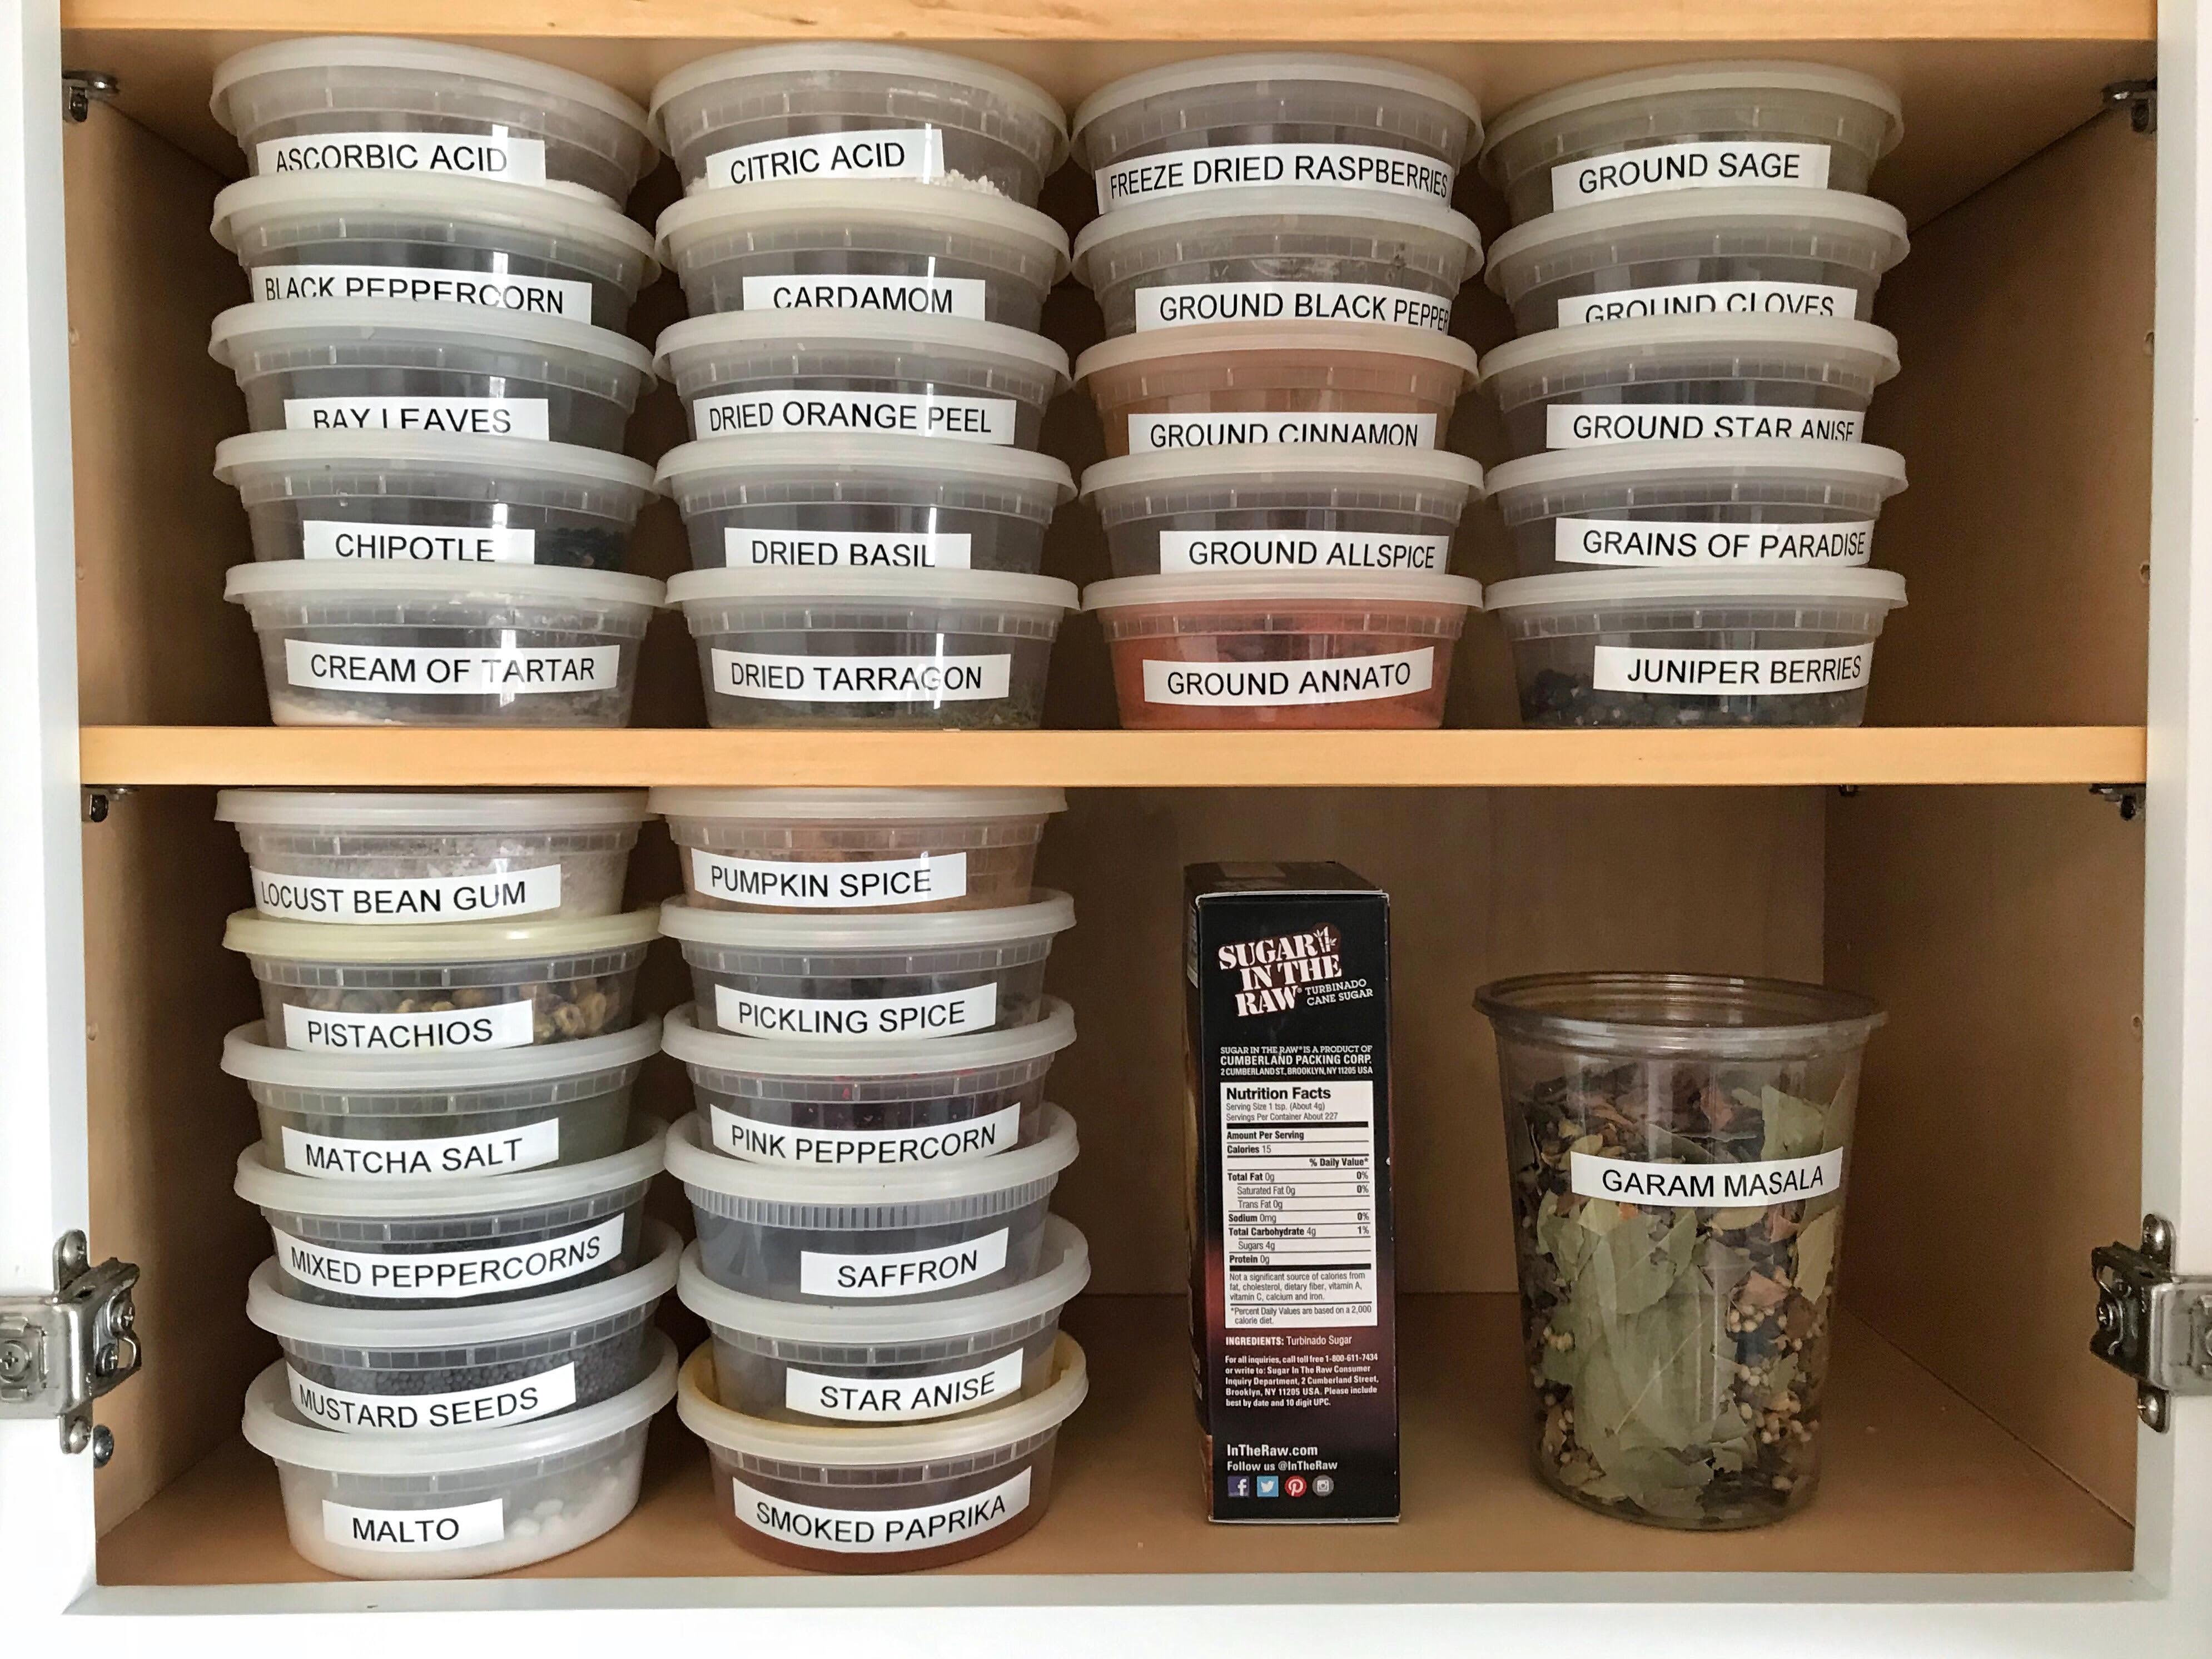 How To Organize Spices In A Small Kitchen - Organized-ish